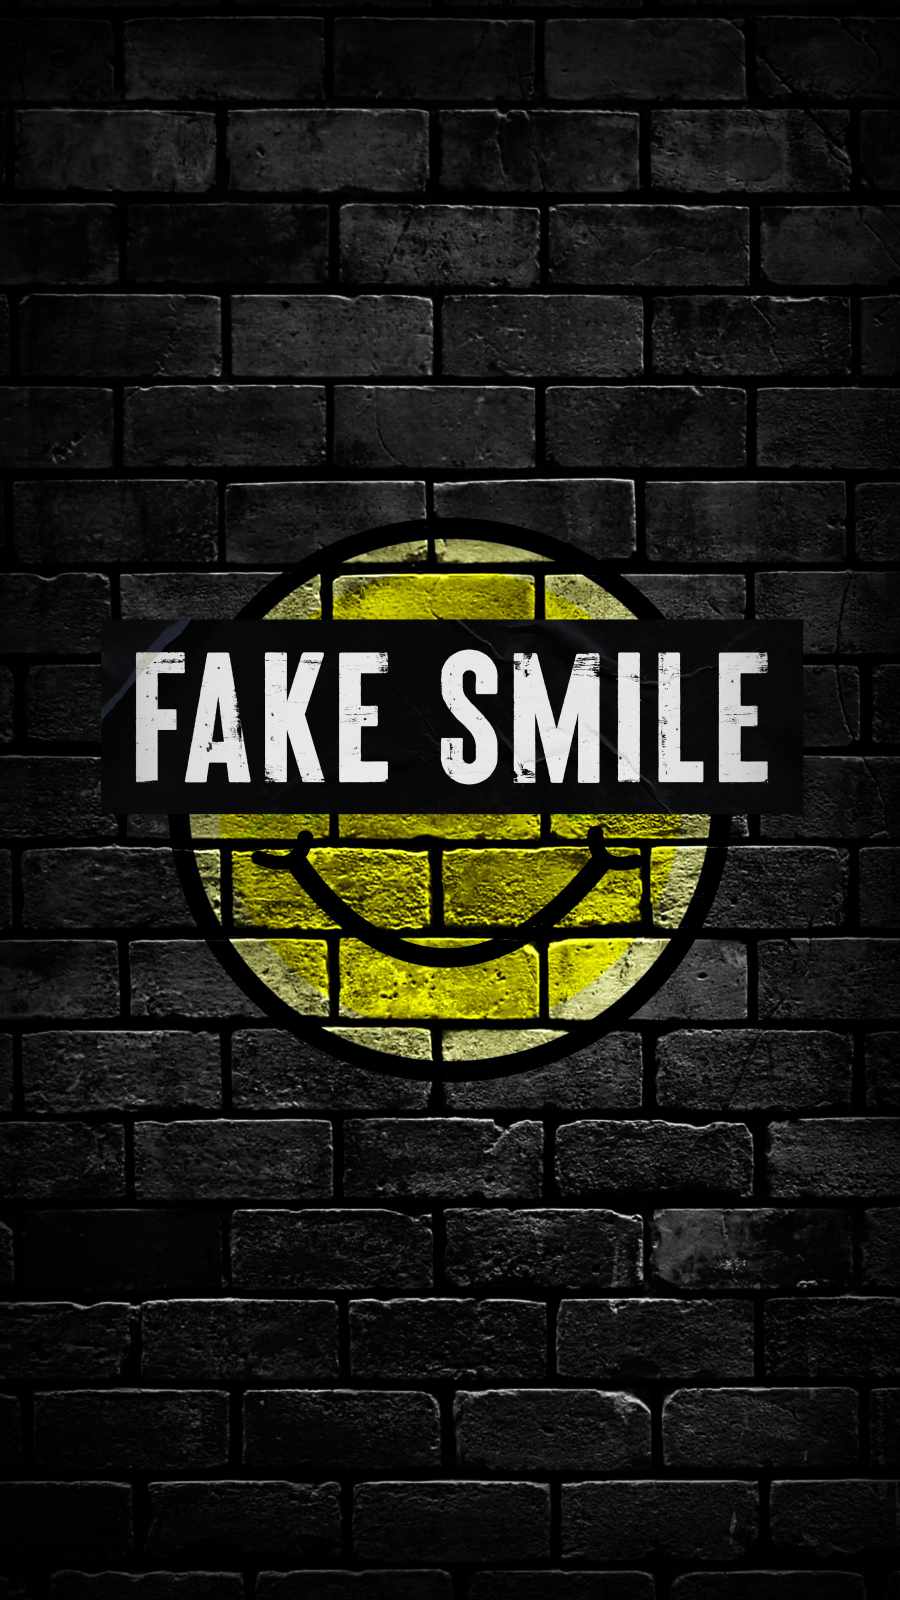 Fake Smile IPhone Wallpaper - IPhone Wallpapers : iPhone Wallpapers